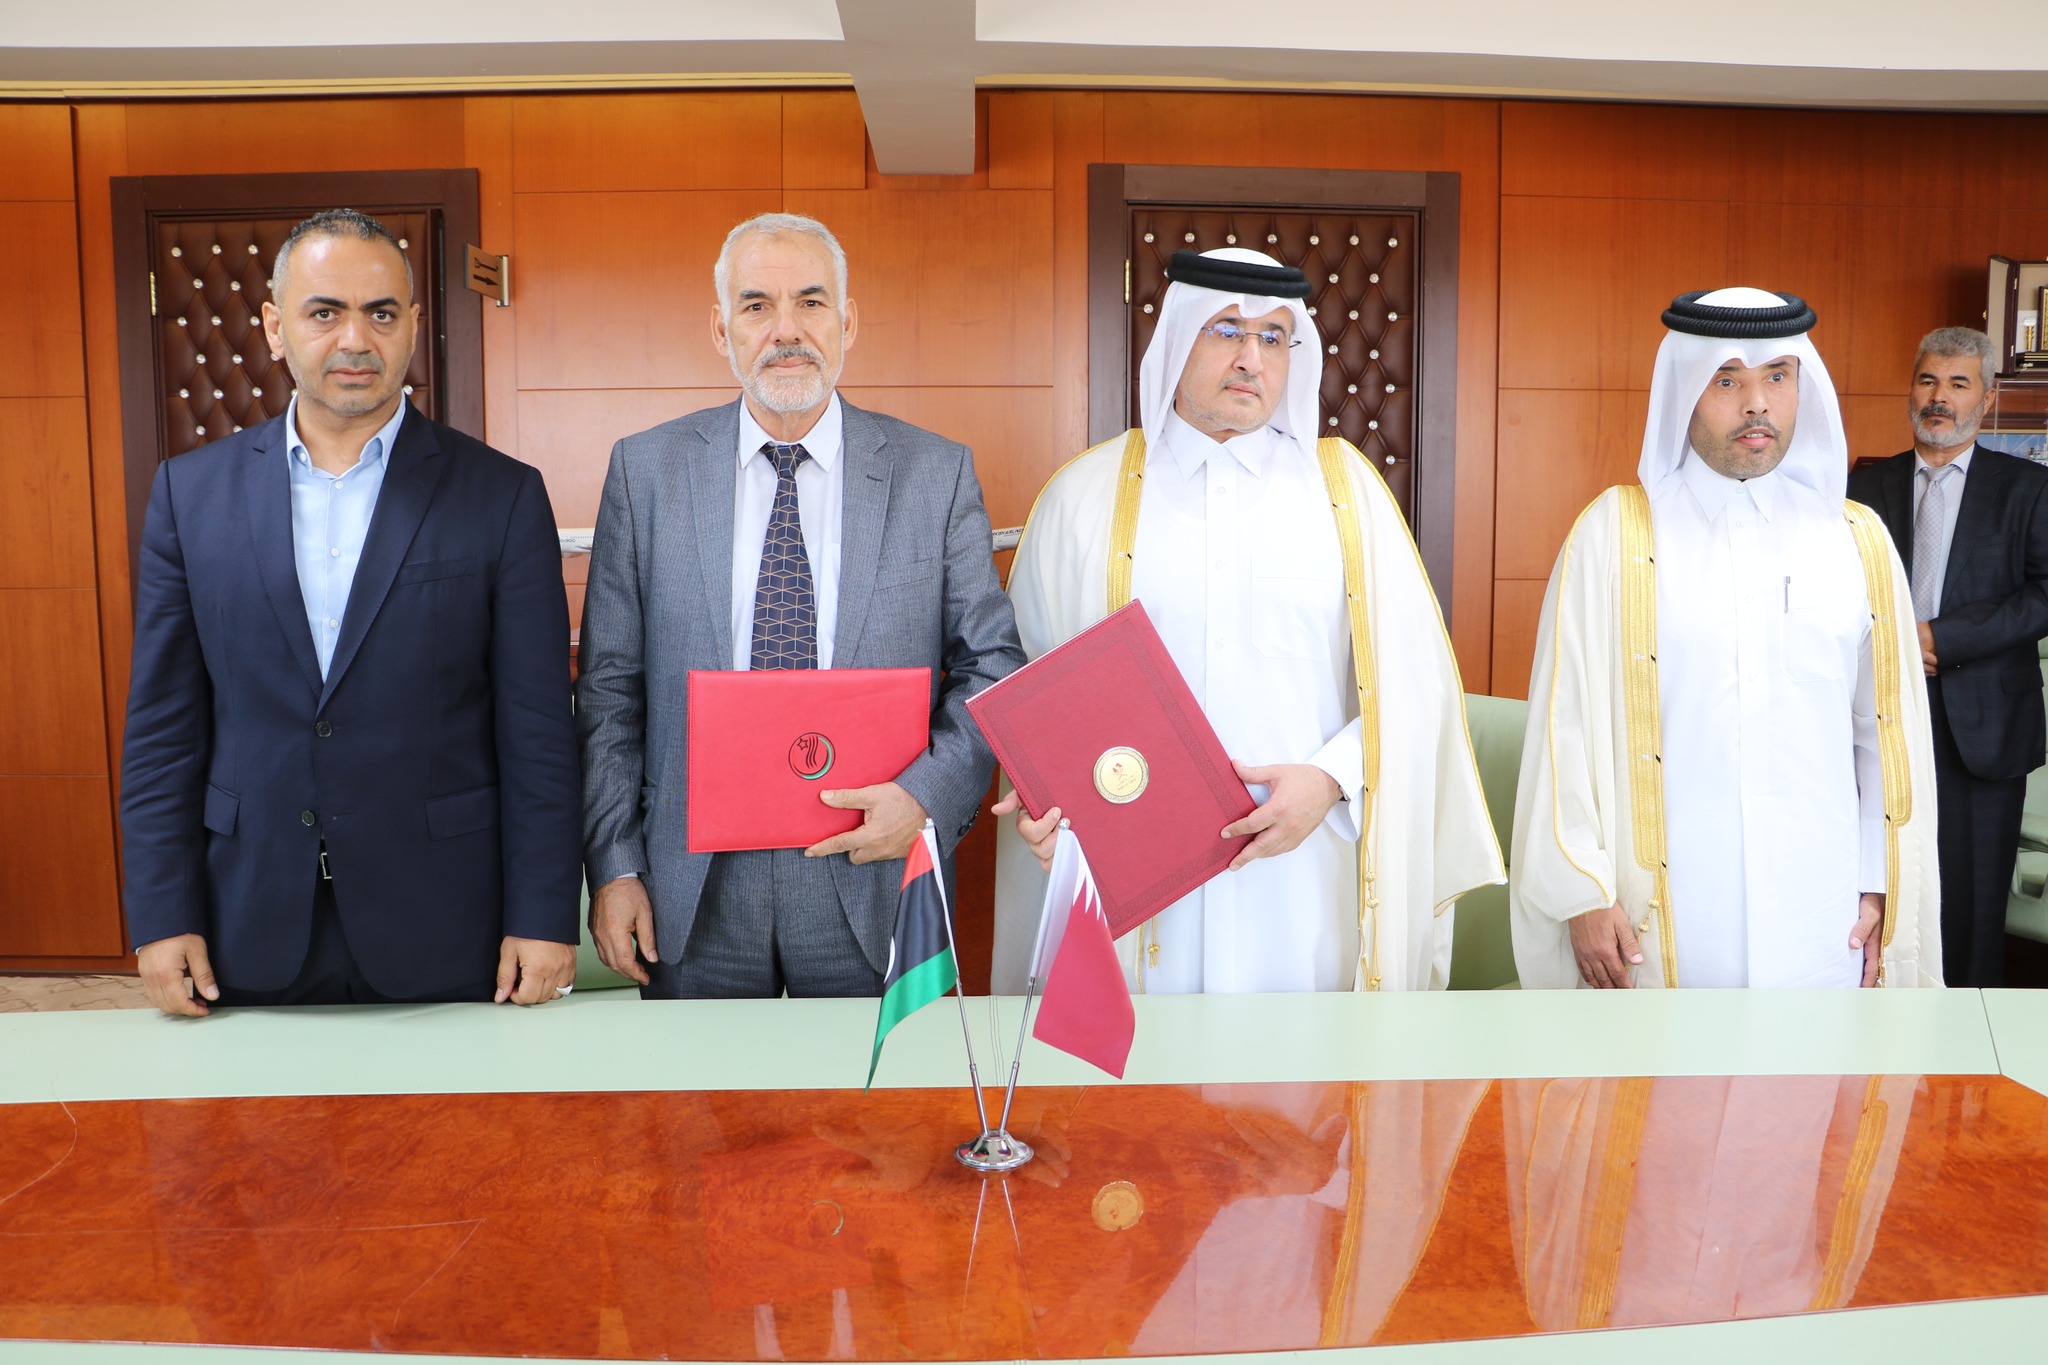 Qatar, Libya sign MoU on civil aviation , General Civil Aviation Authority (GCAA) To Conduct Field Visits In October.